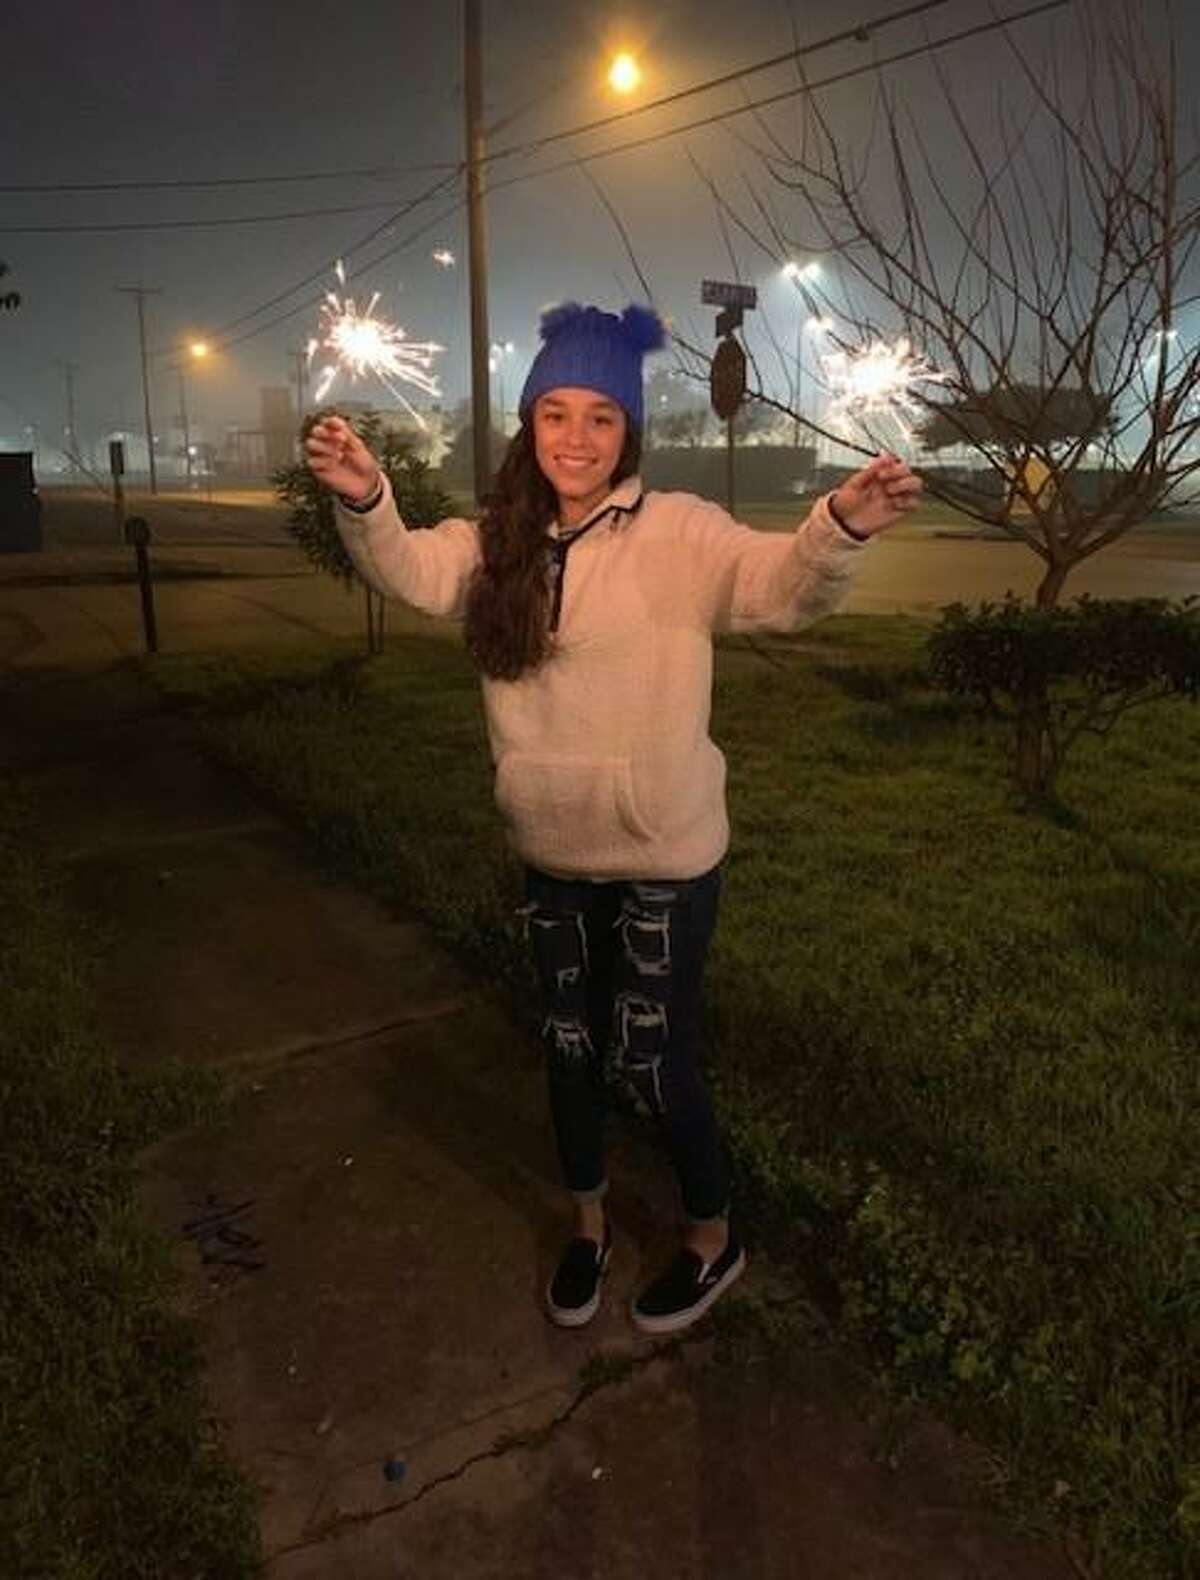 Alexa Denice Montez, 16, celebrated her last New Year’s Day with her father’s family in 2019, watching fireworks and lighting sparklers.